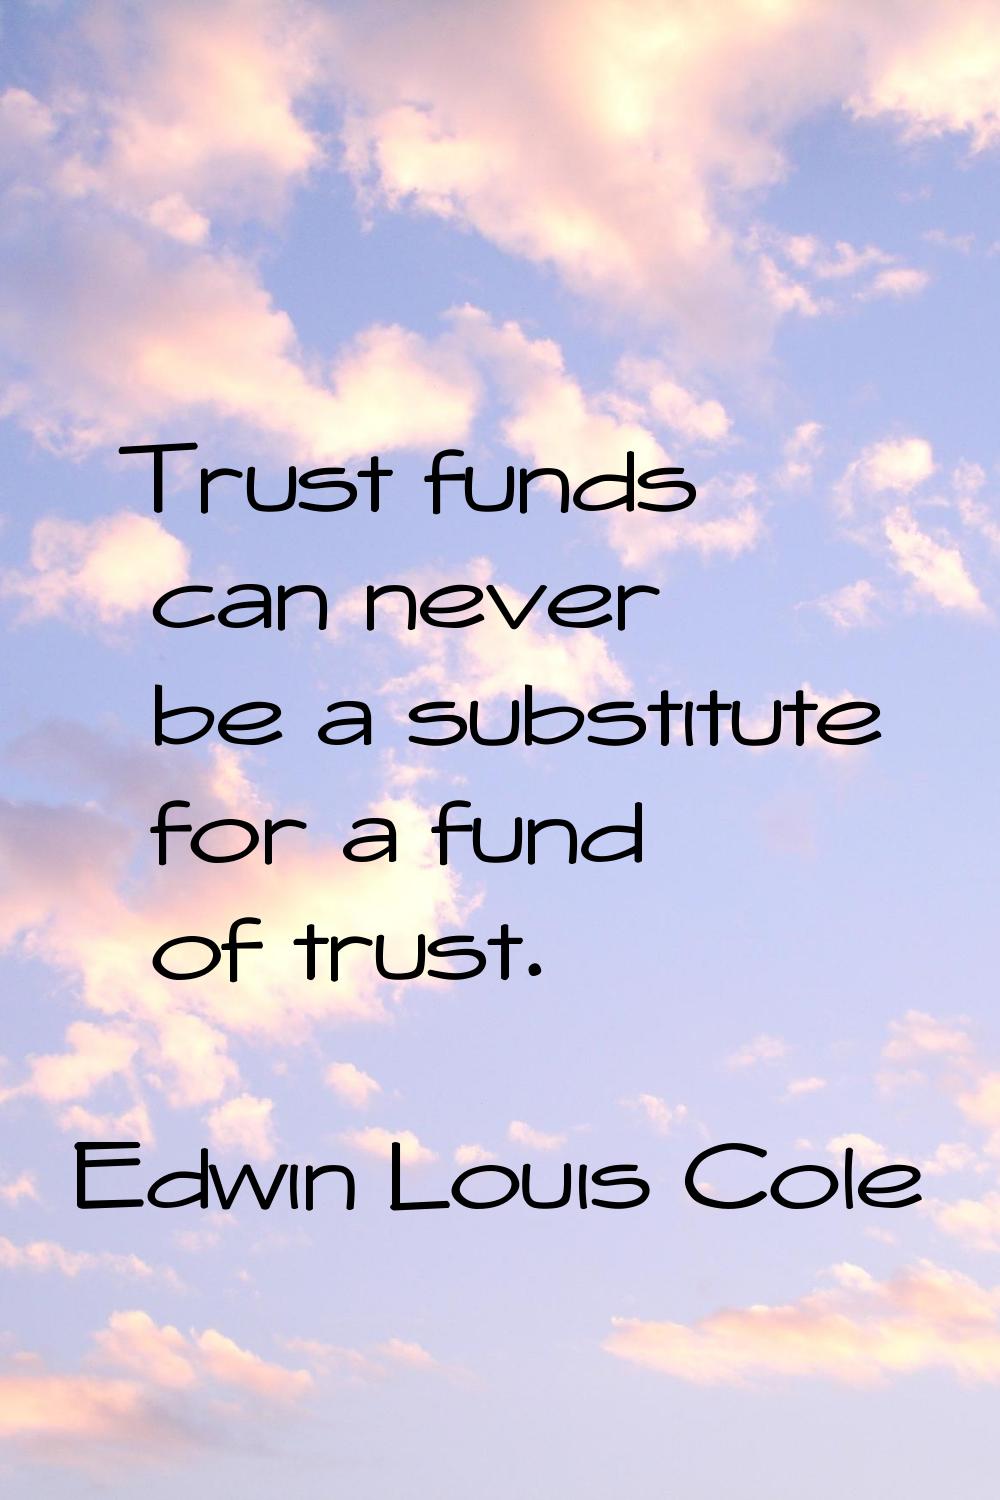 Trust funds can never be a substitute for a fund of trust.